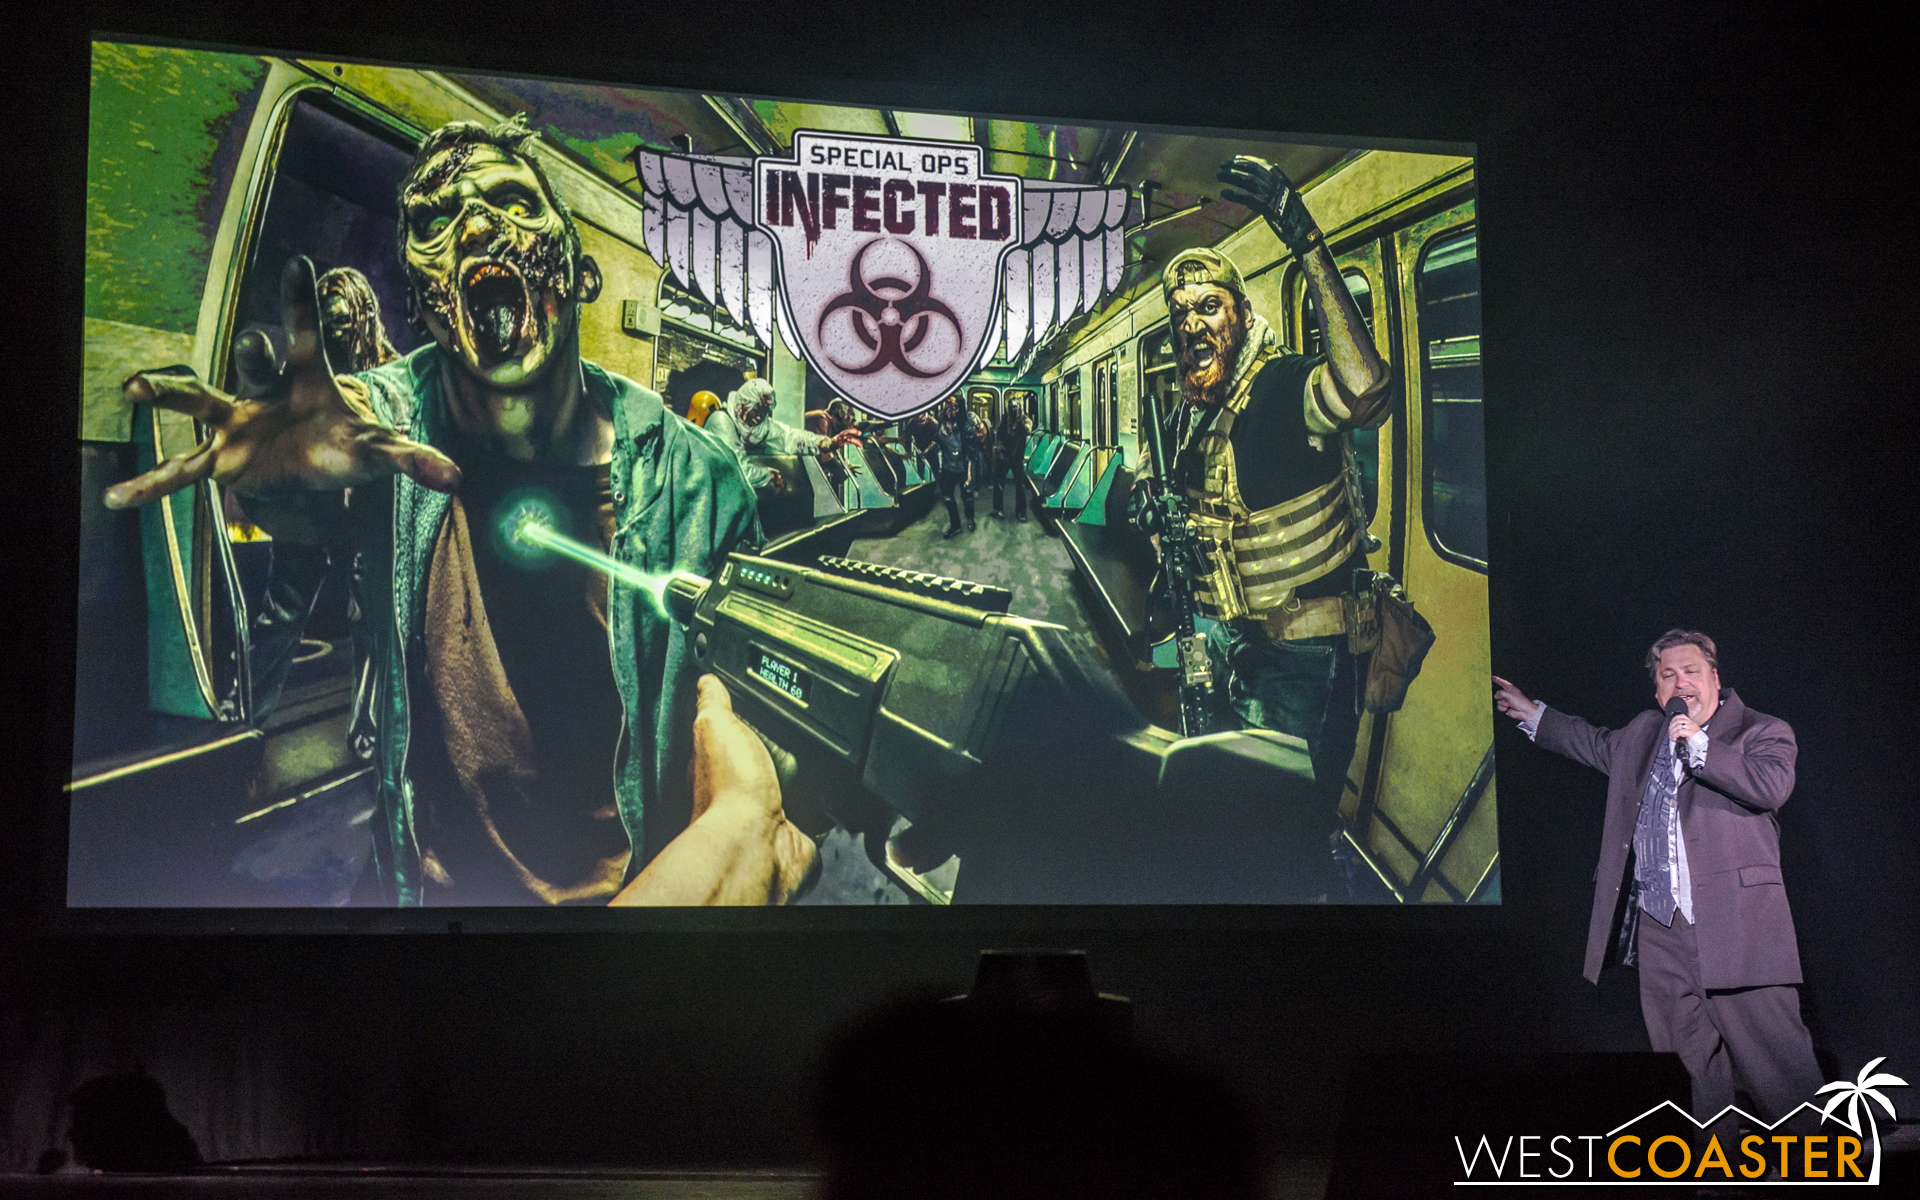  Speaking of Cooke, Special Ops: Infected returns for a second year over behind Mystery Lodge.&nbsp; This year, there will be more guns (which hopefully means higher capacity), more zombies, new missions, additional special effects and interactive ta